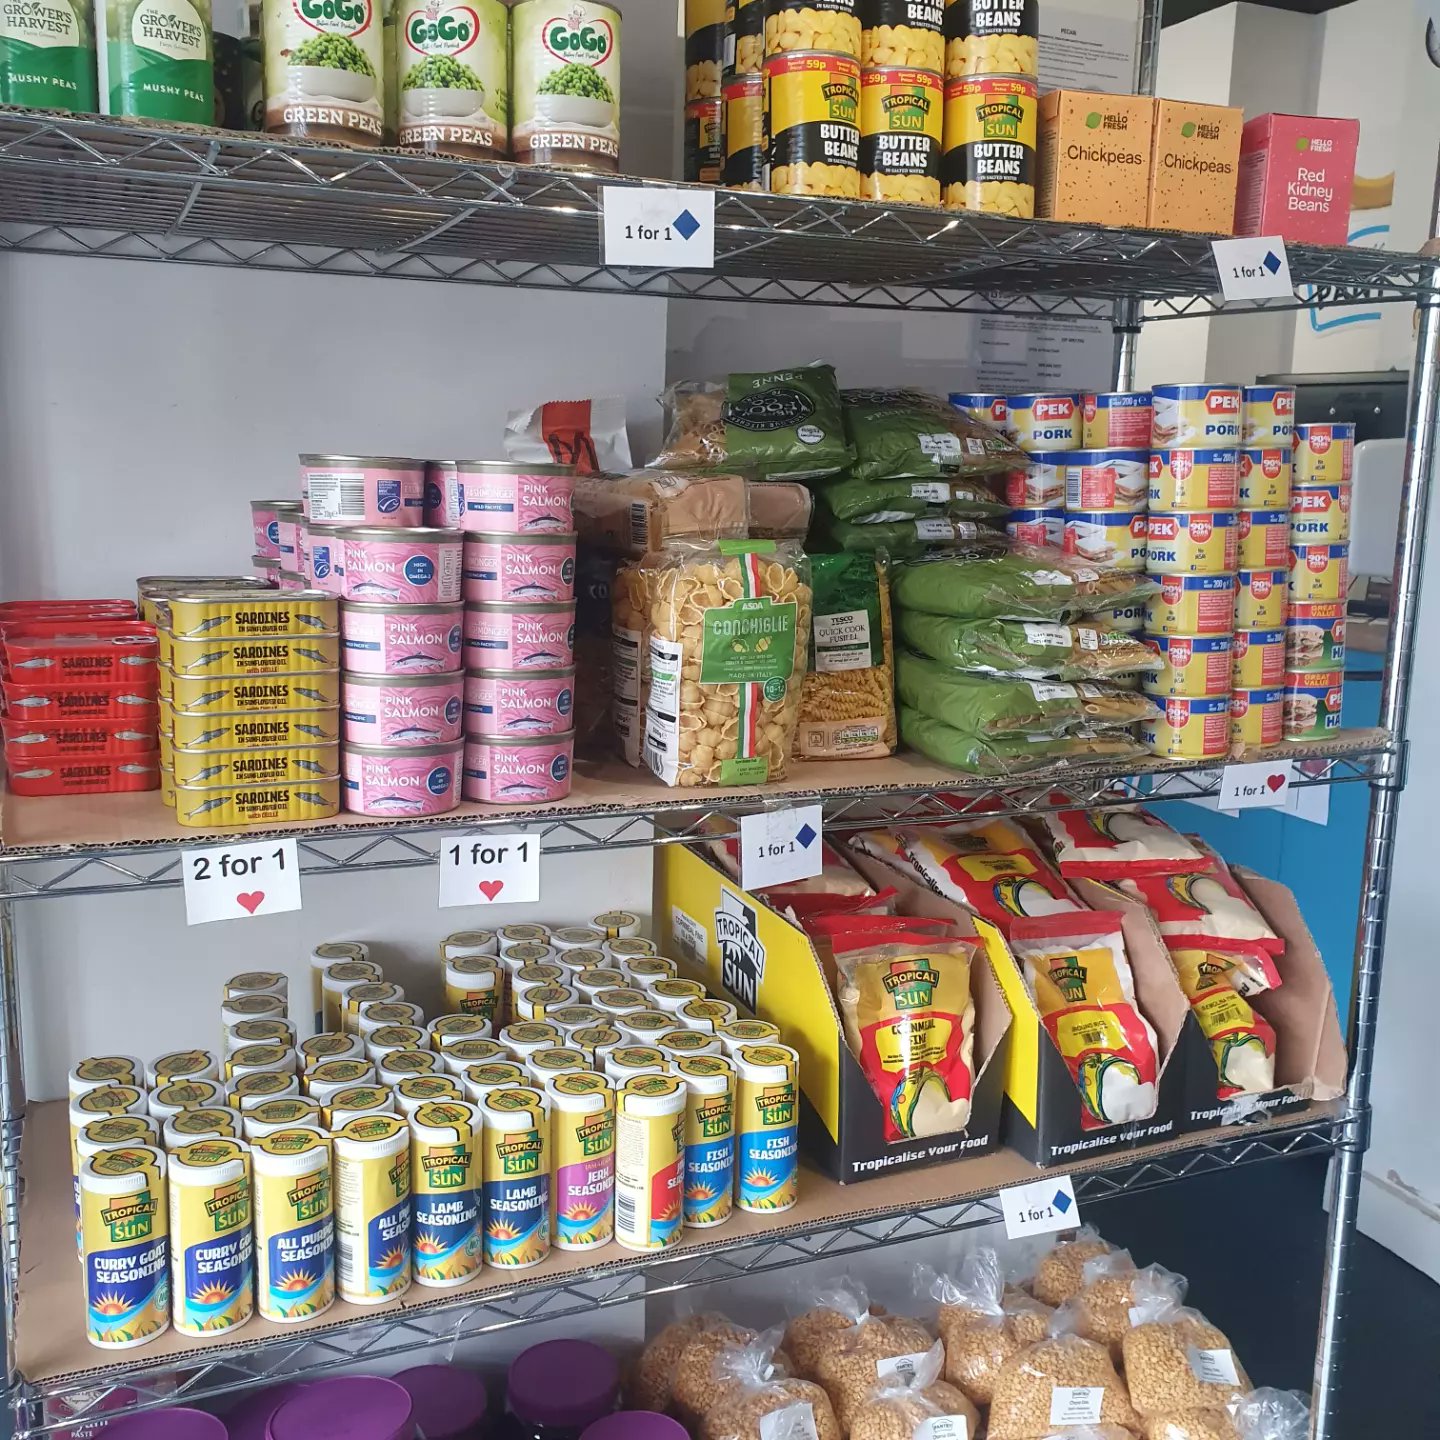 Peckham Pantry on Twitter: "We are aware that cost of food items has increased! Despite that, we are still passionate to continue to support our community to save on food shopping with